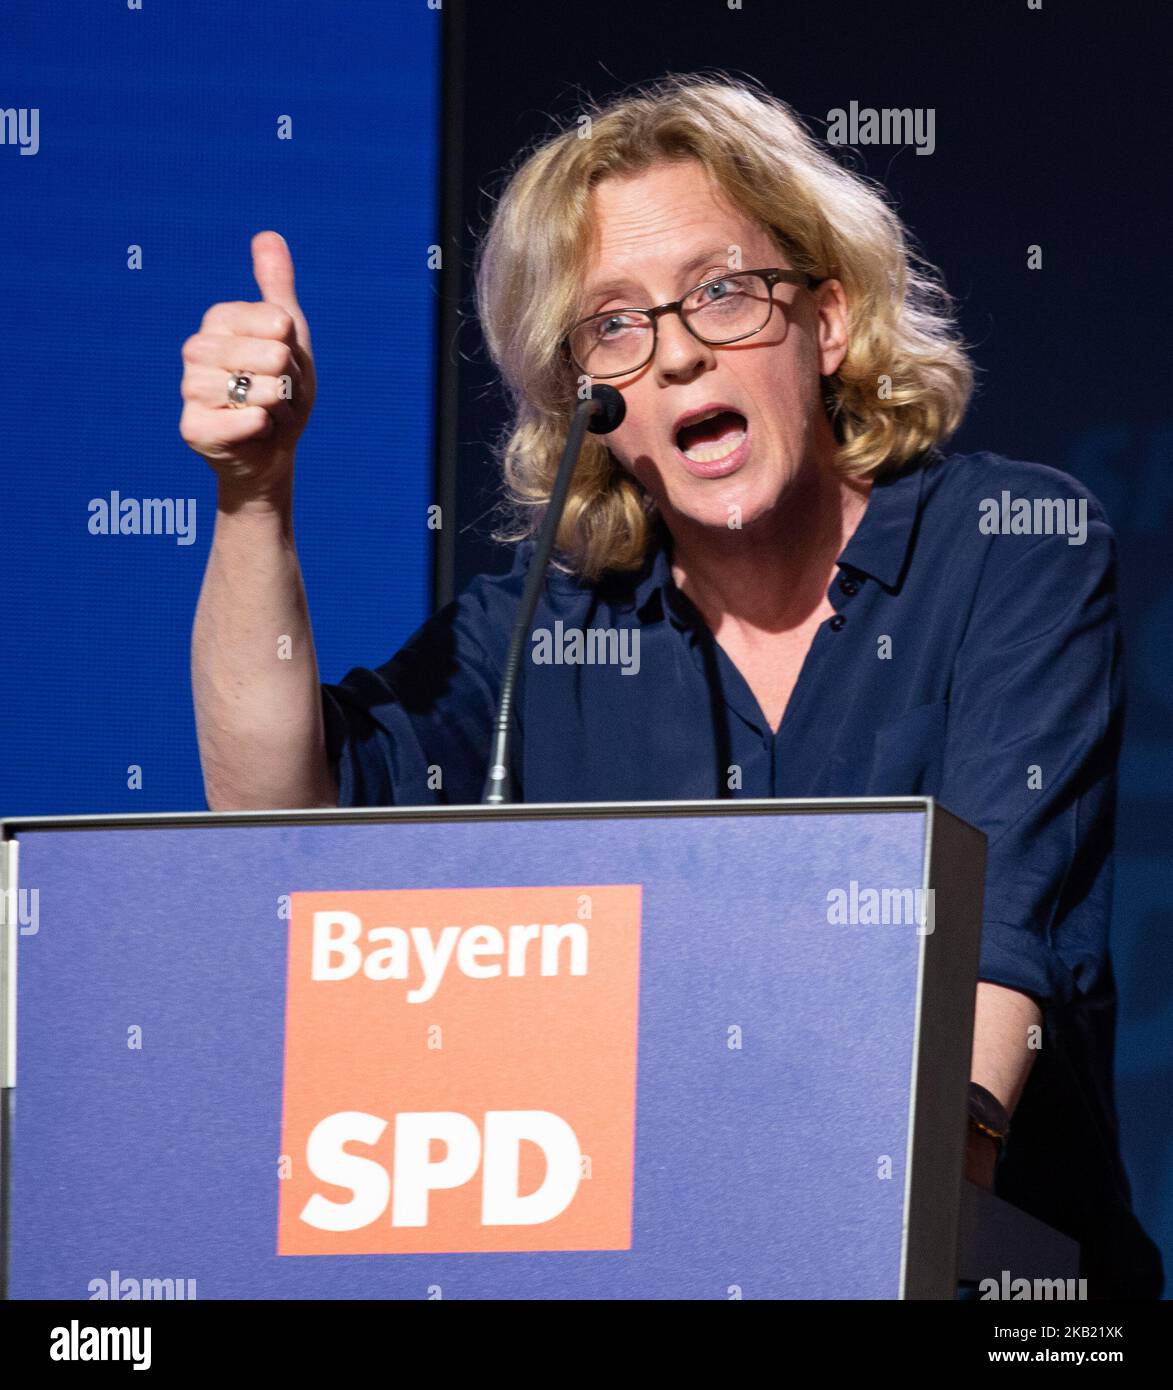 Natascha Kohnen holding a speech. The Munich Mayor Dieter Reiter ( SPD ) and the top candidate of the SPD for the Bavarian State Elections Natascha Kohnen held a speech at Augustiner in Munich, Germany on October 10, 2018. The Bavarian State Elections will be held on October 14. (Photo by Alexander Pohl/NurPhoto) Stock Photo